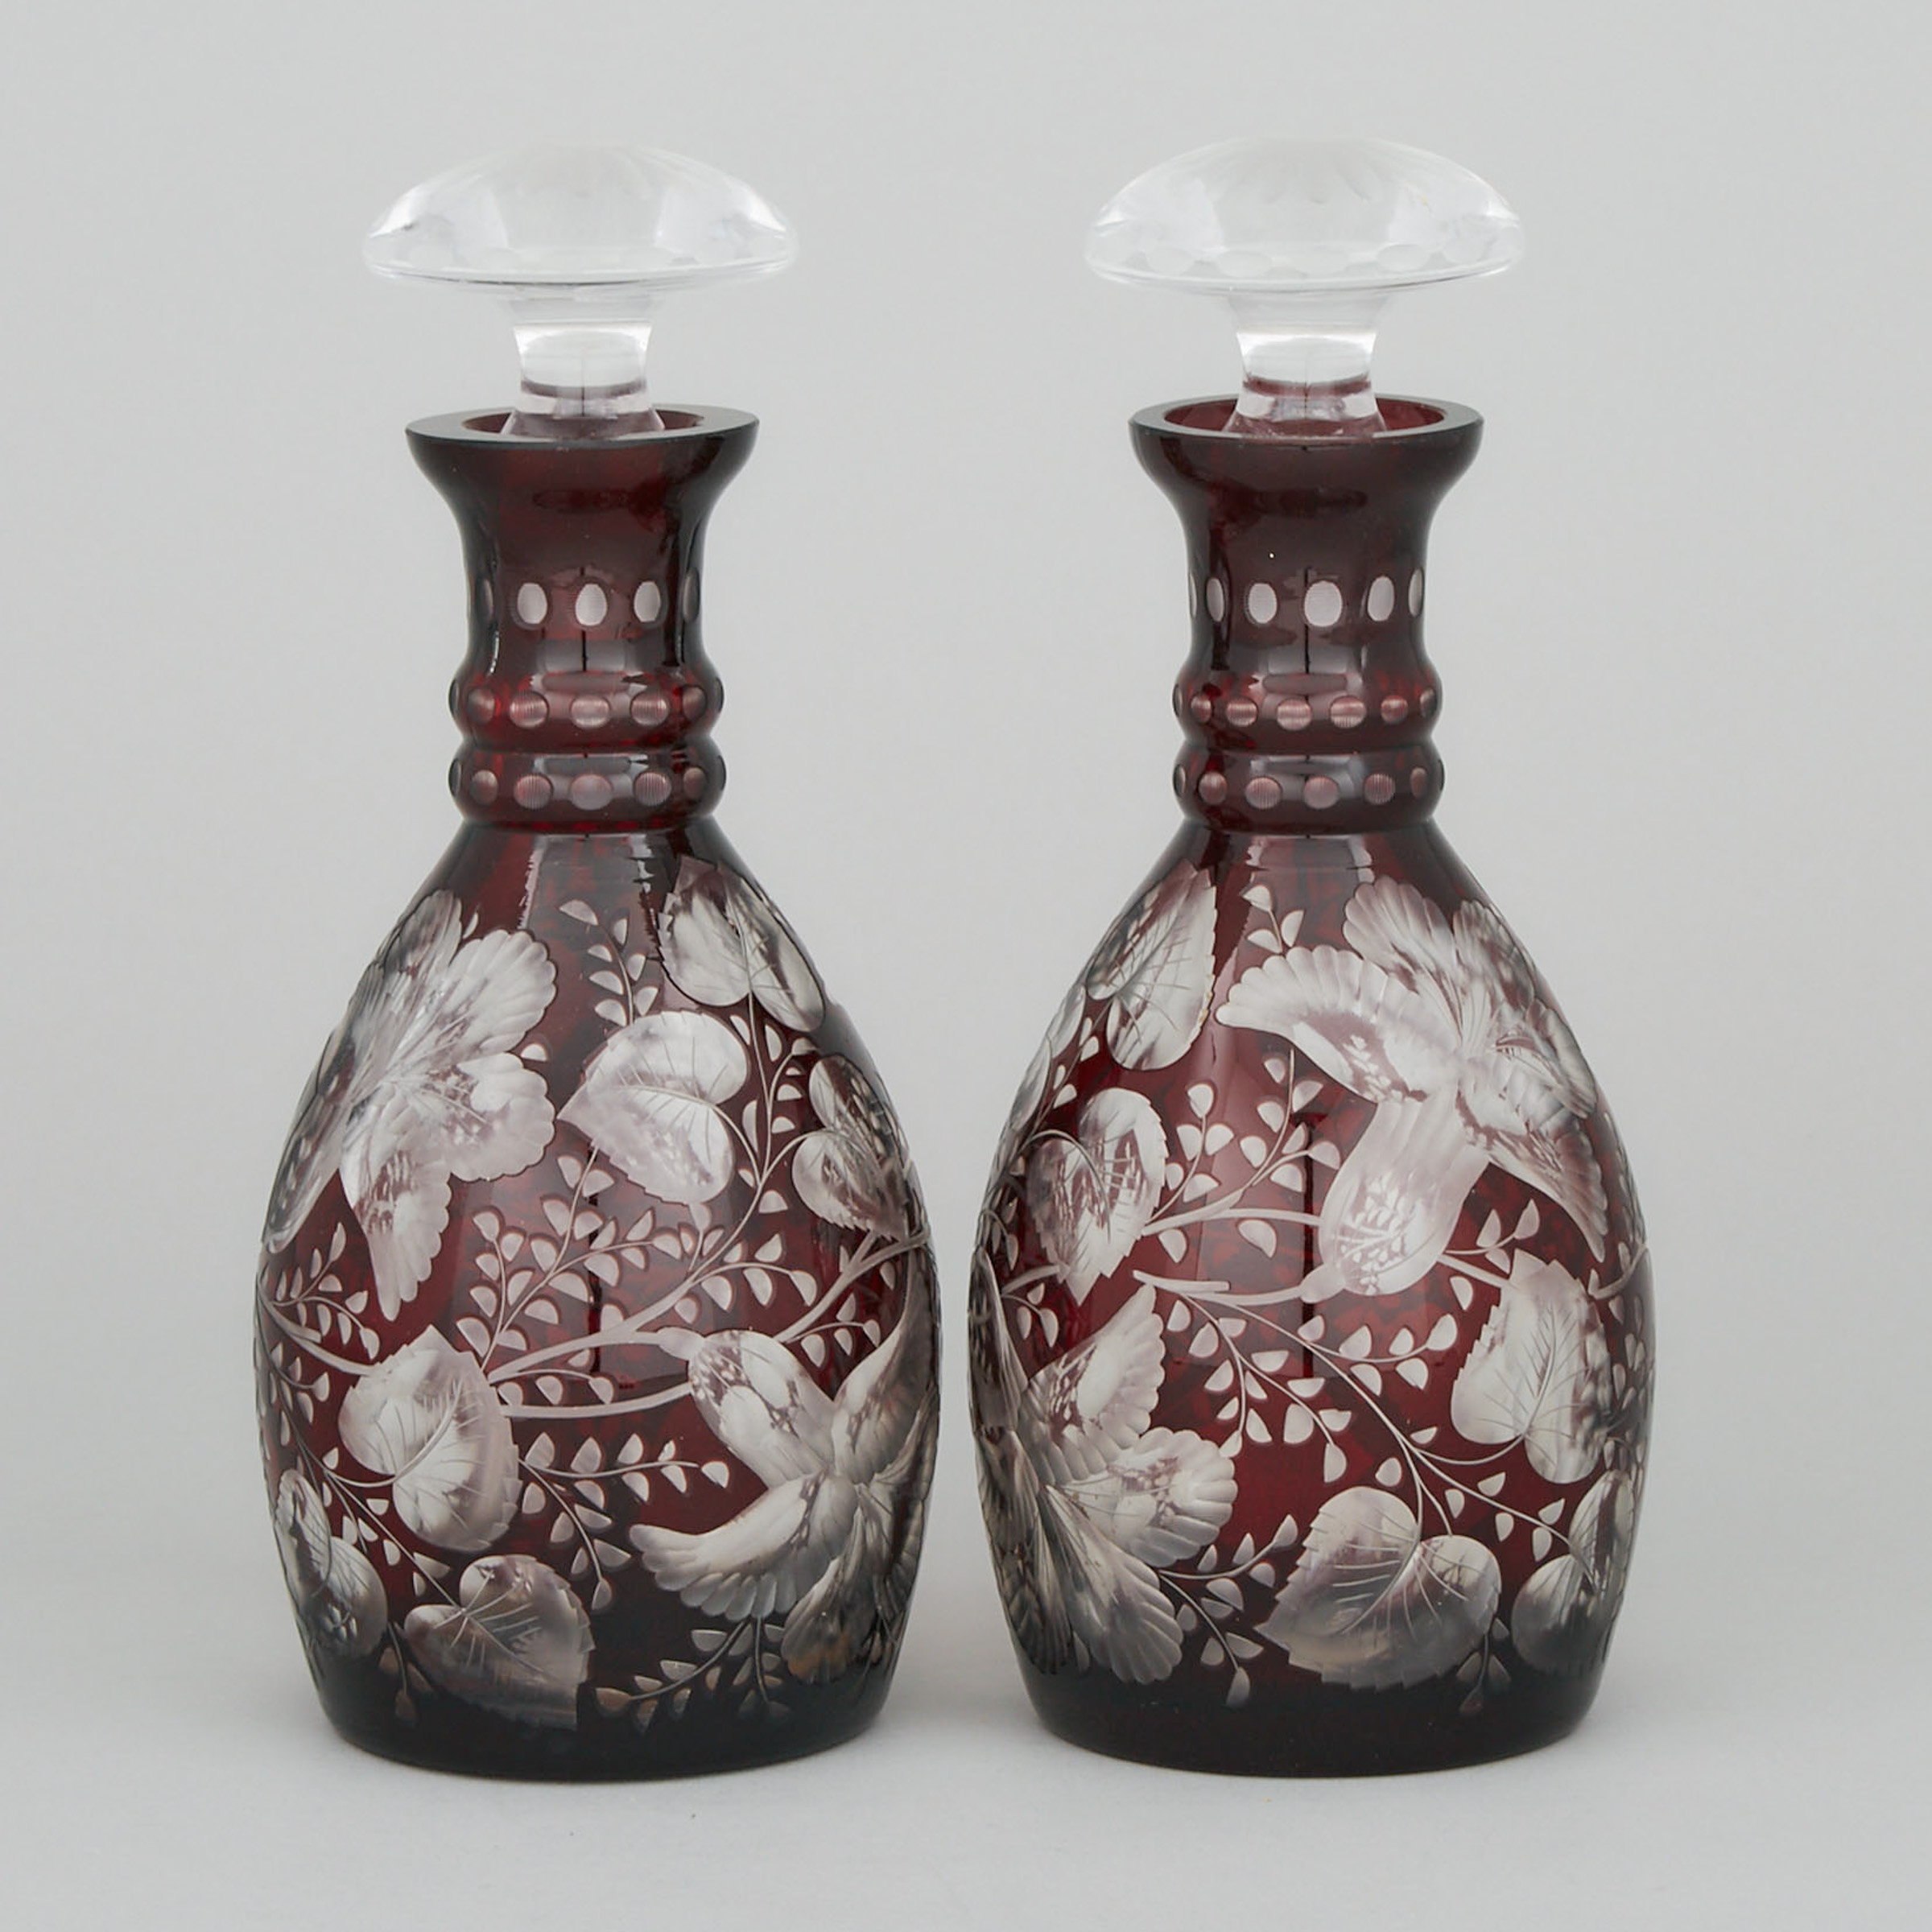 Pair of Bohemian Red Overlaid, Cut and Engraved Glass Decanters, 20th century